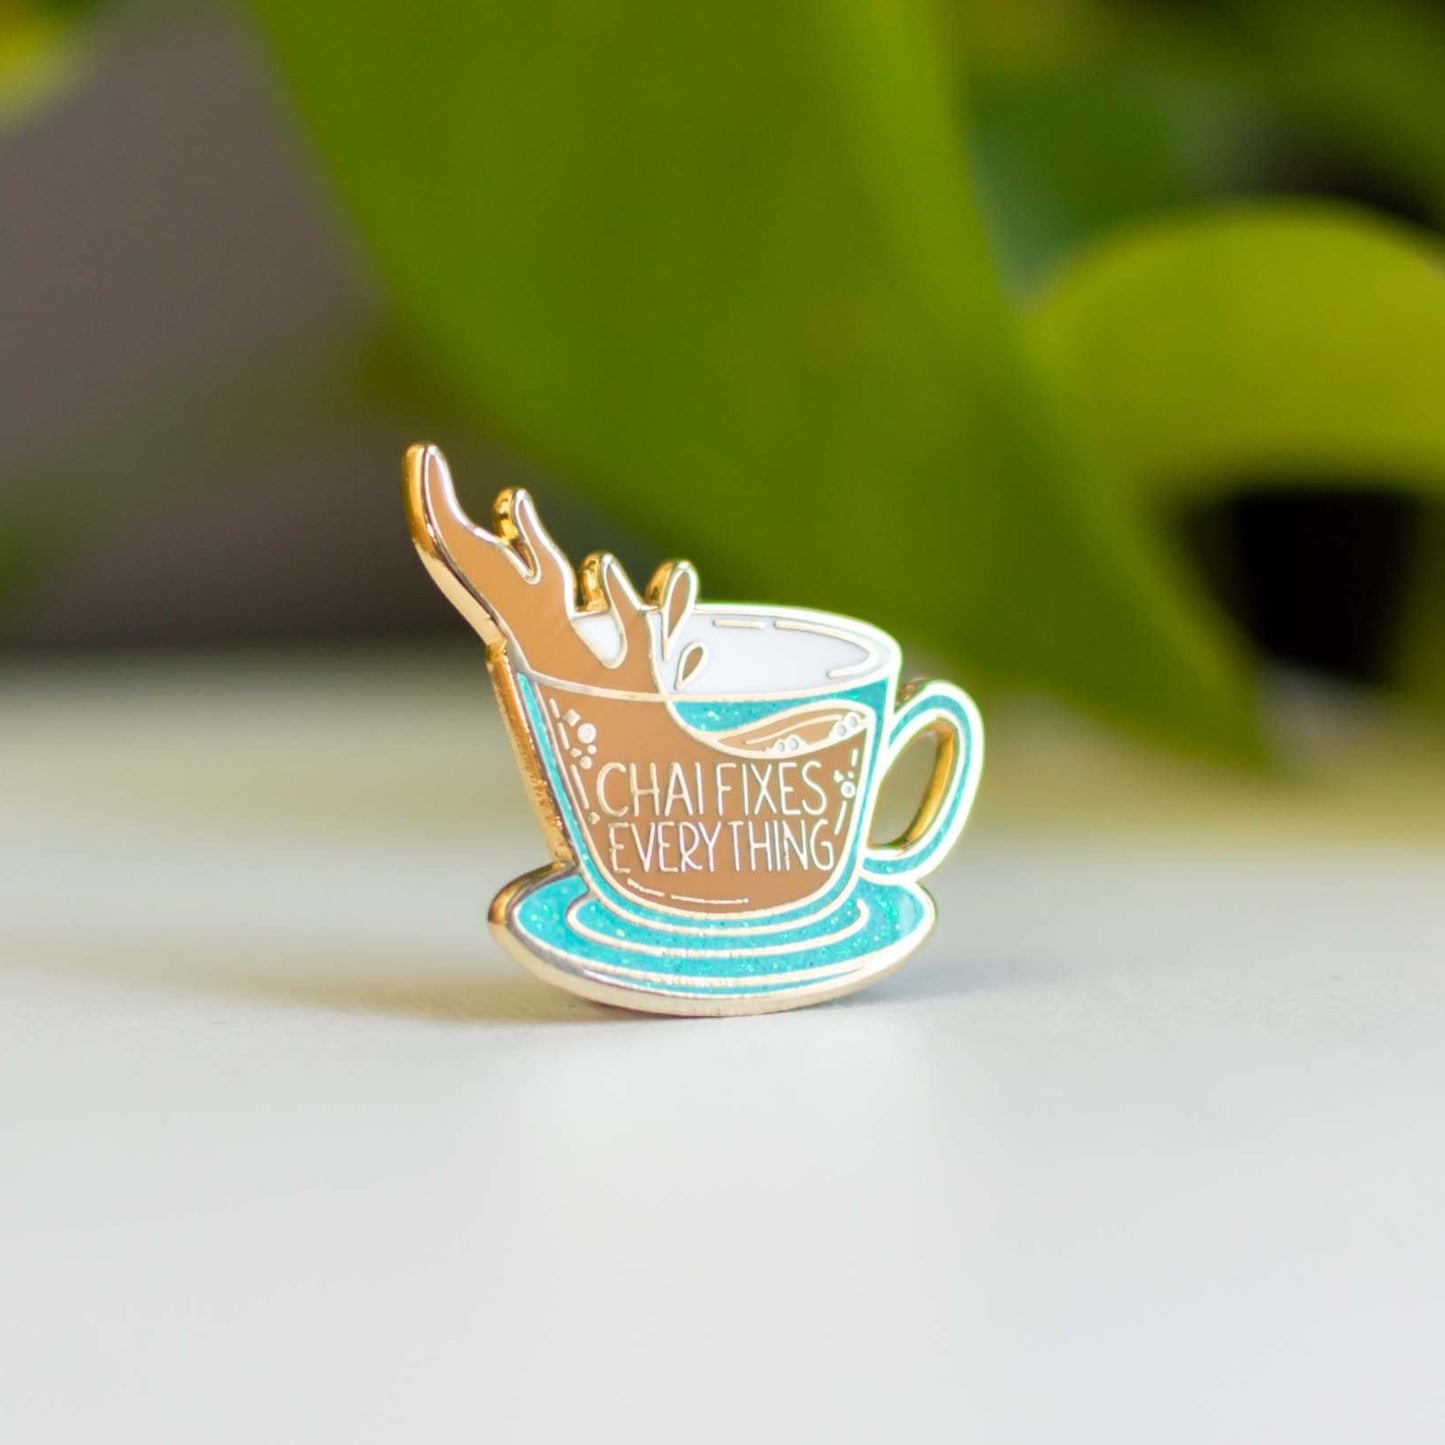 Chai Fixes Everything Hard Enamel Pin in Gold